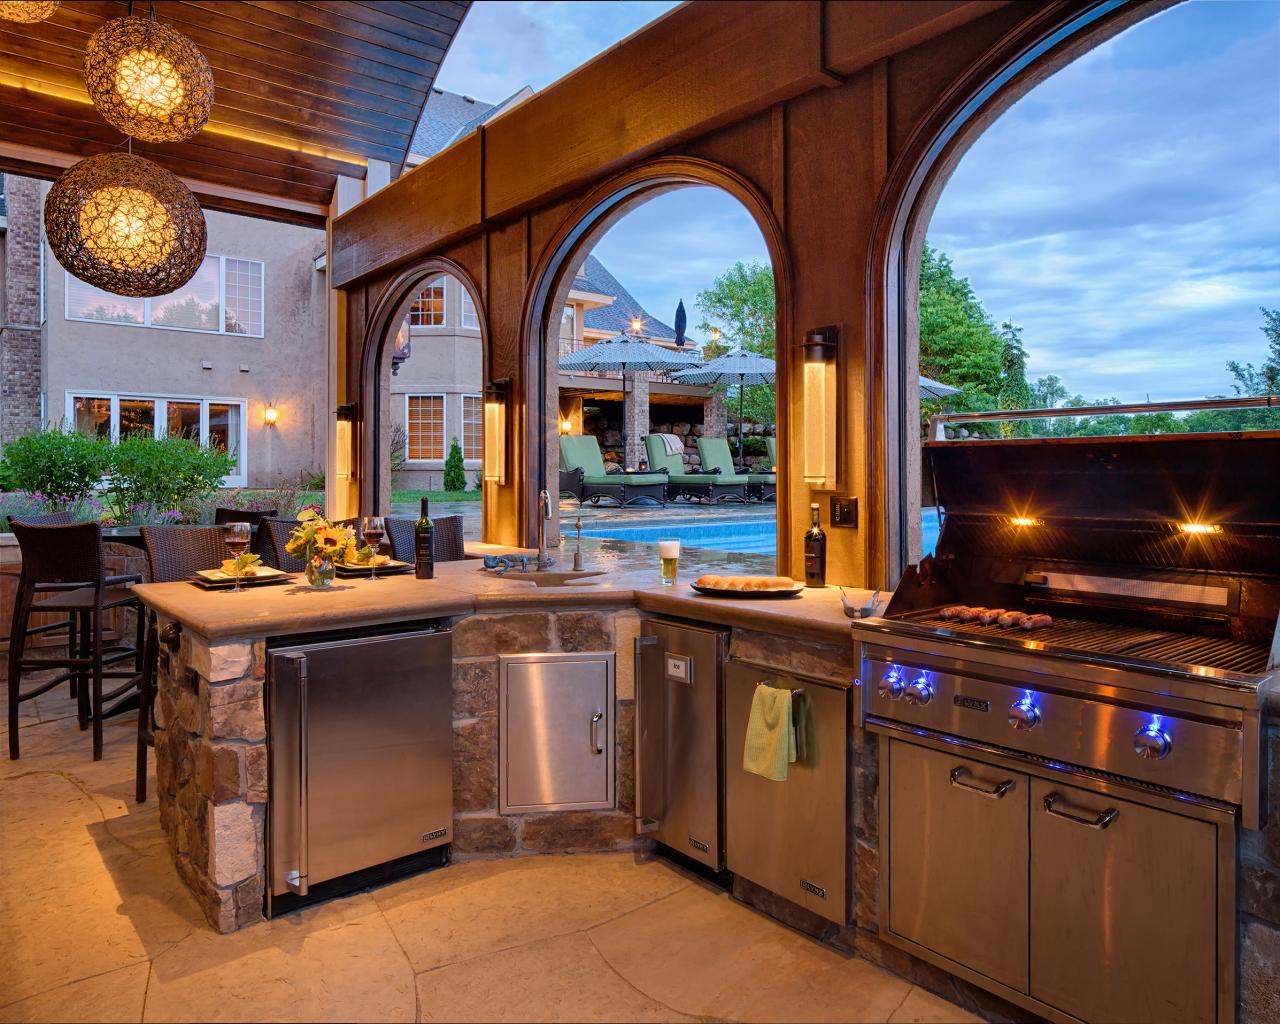 12 Fabulous Kitchen Designs With Indoor Built In Grill  Outdoor kitchen,  Outdoor kitchen appliances, Built in grill